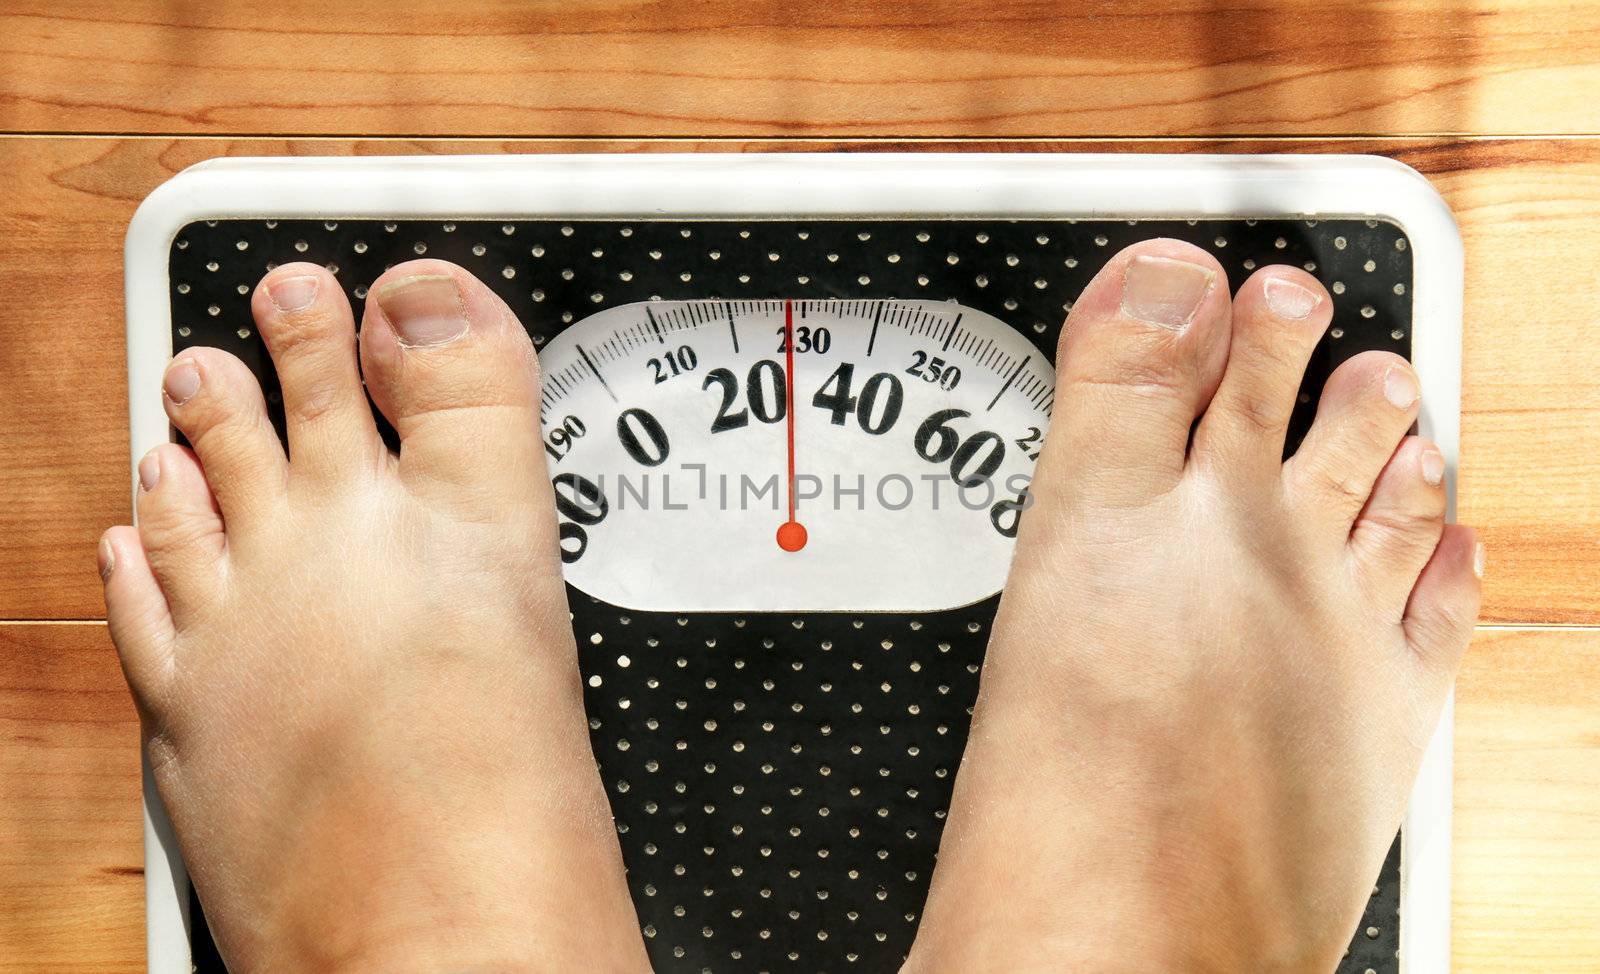 Feet of a fat person on a weight scale (measuring both in pounds and kilograms) showing obesity.